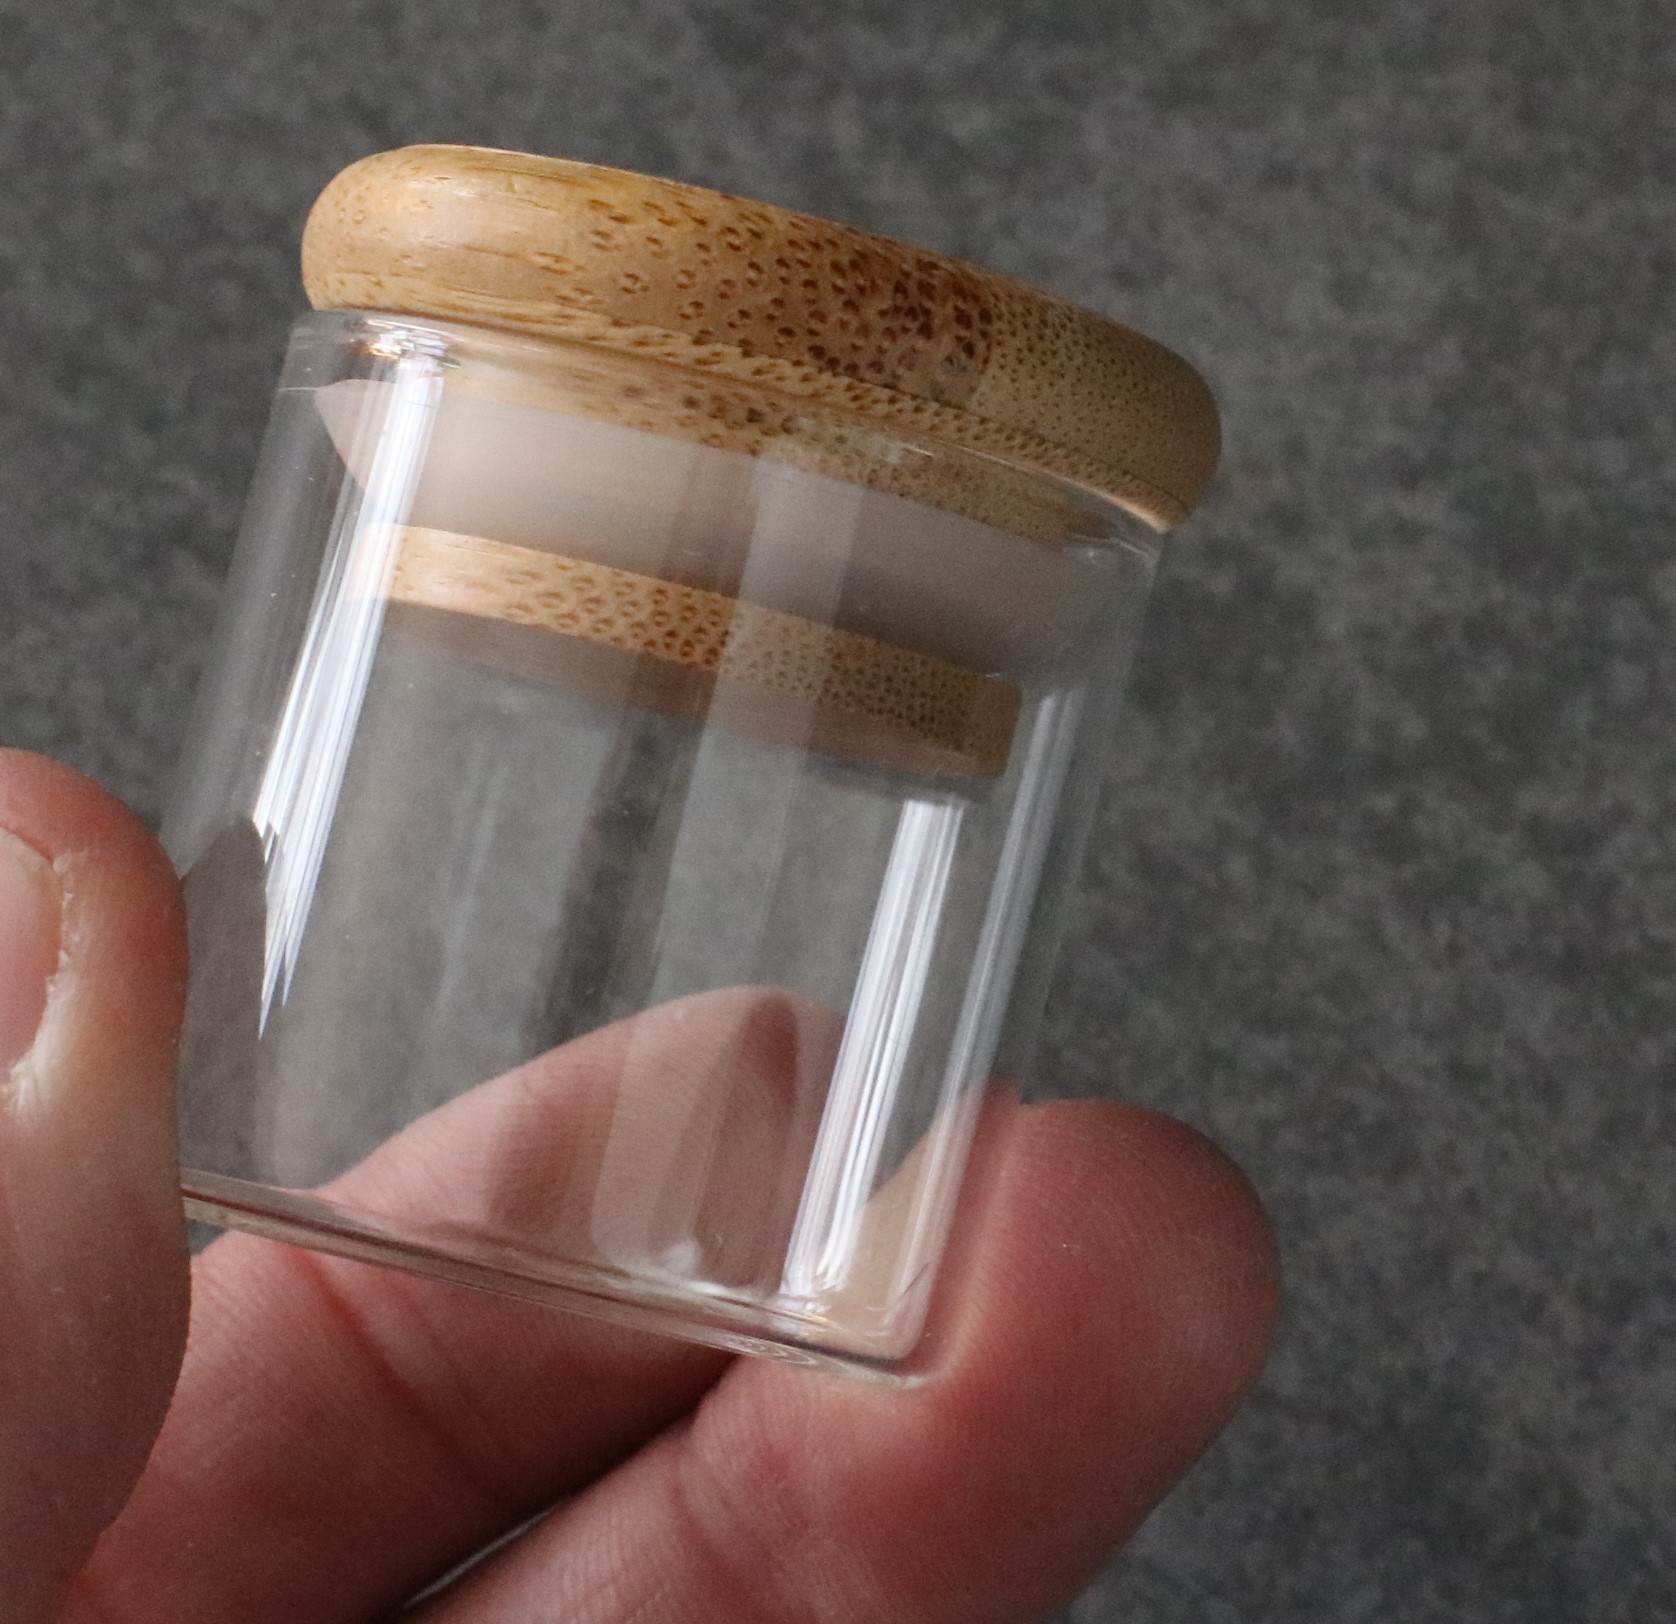 Glass Stash Jar with bamboo Lid PRO 420 - PRO 420